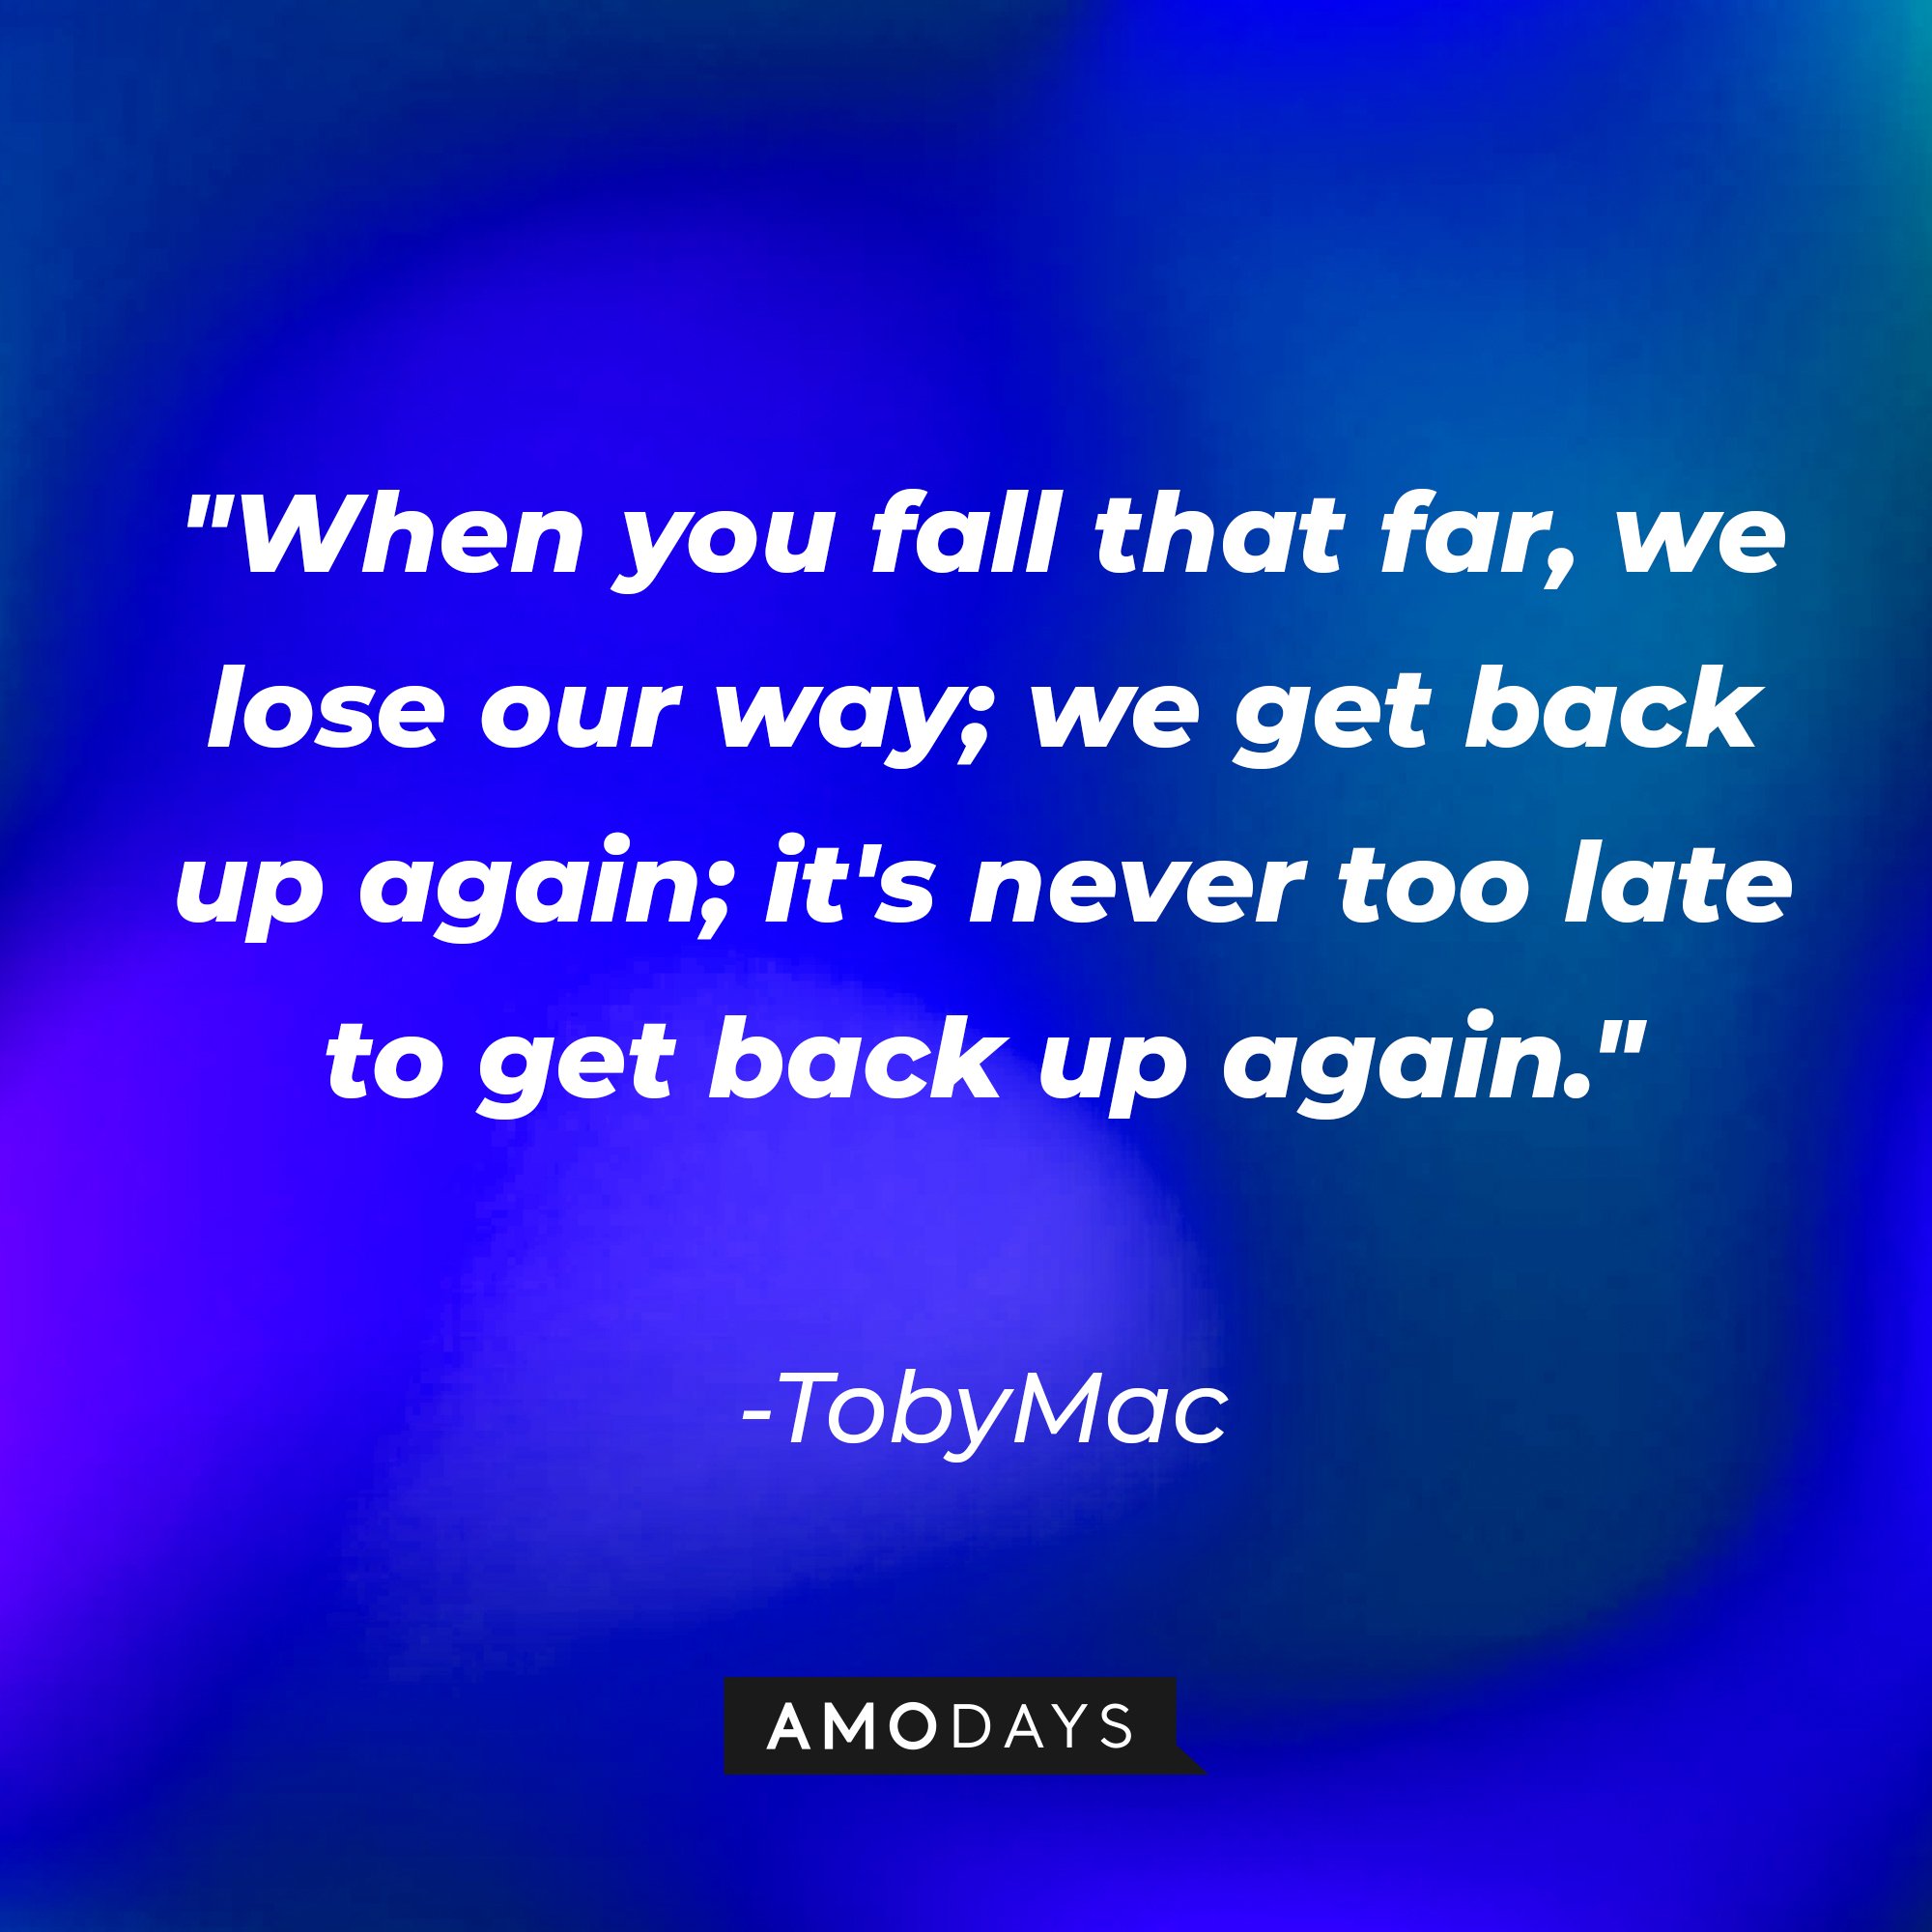 TobyMac's quote: "When you fall that far, we lose our way; we get back up again; it's never too late to get back up again." | Image: AmoDays